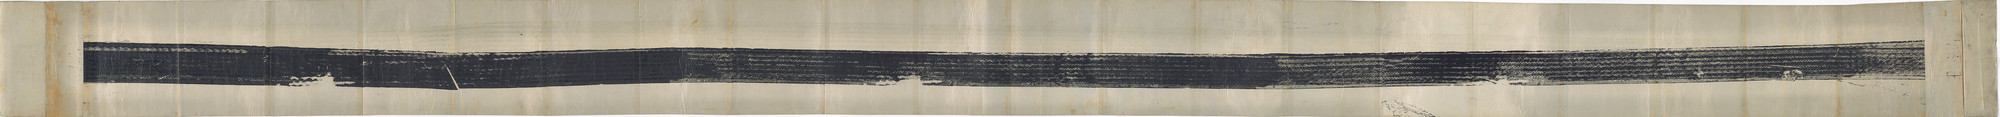 Rauschenberg with John Cage. Tire Print. 1953 | MoMA